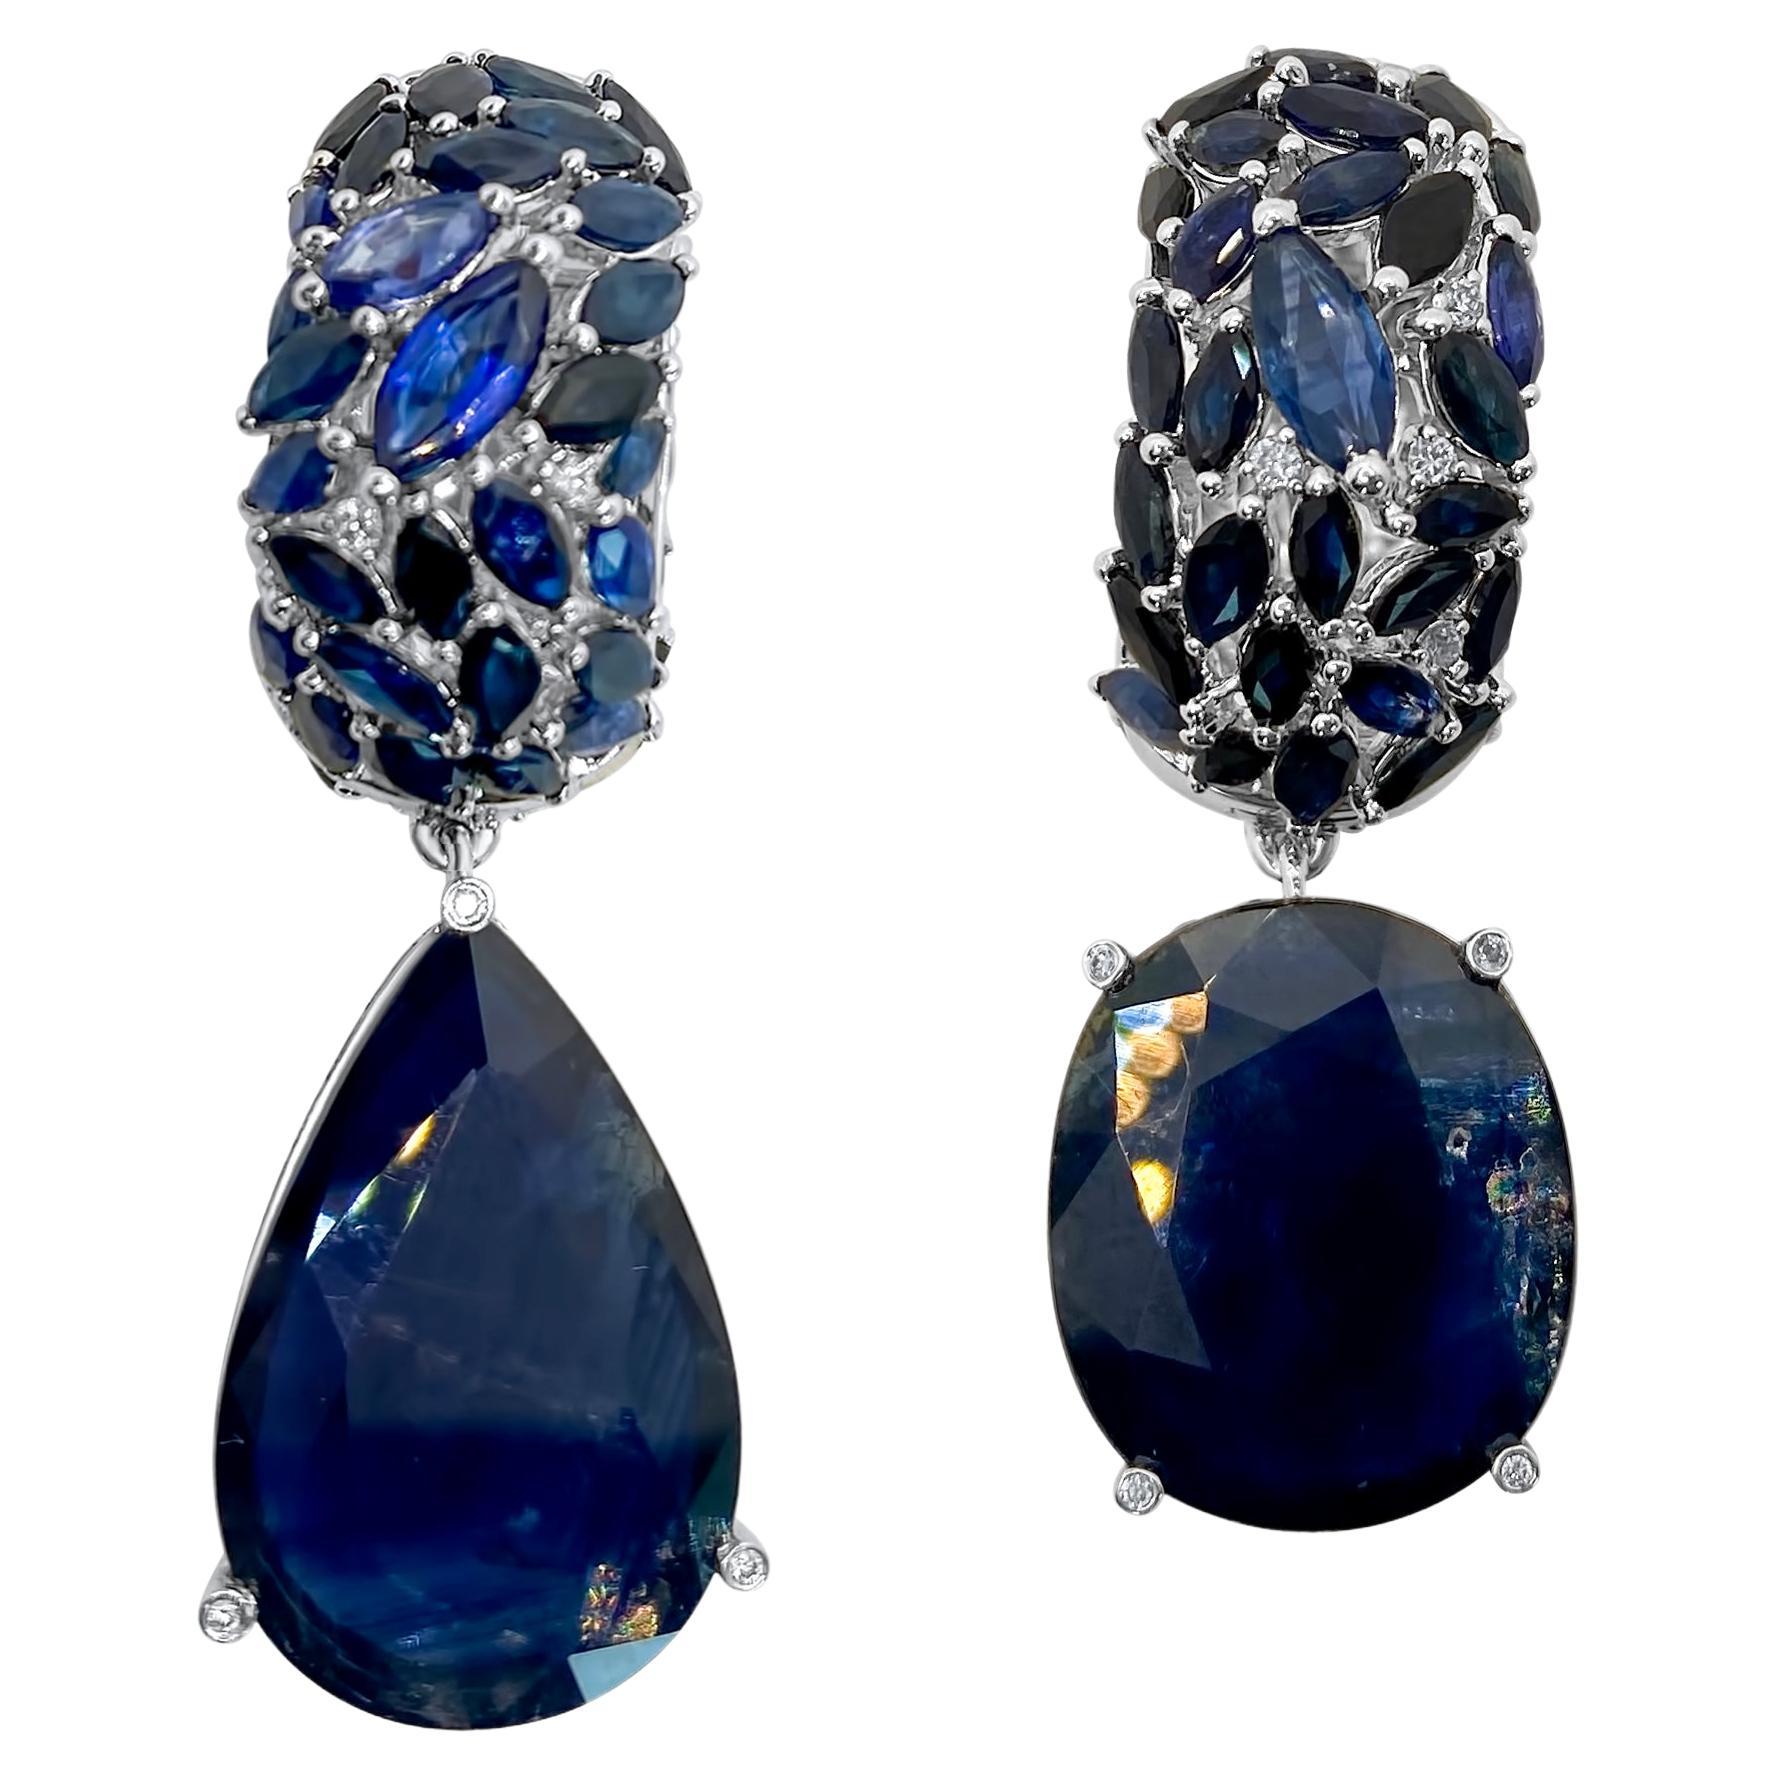 Significant Sapphire Drop Earrings, Two Solitaires Weight 23cts 'One of a Kind'